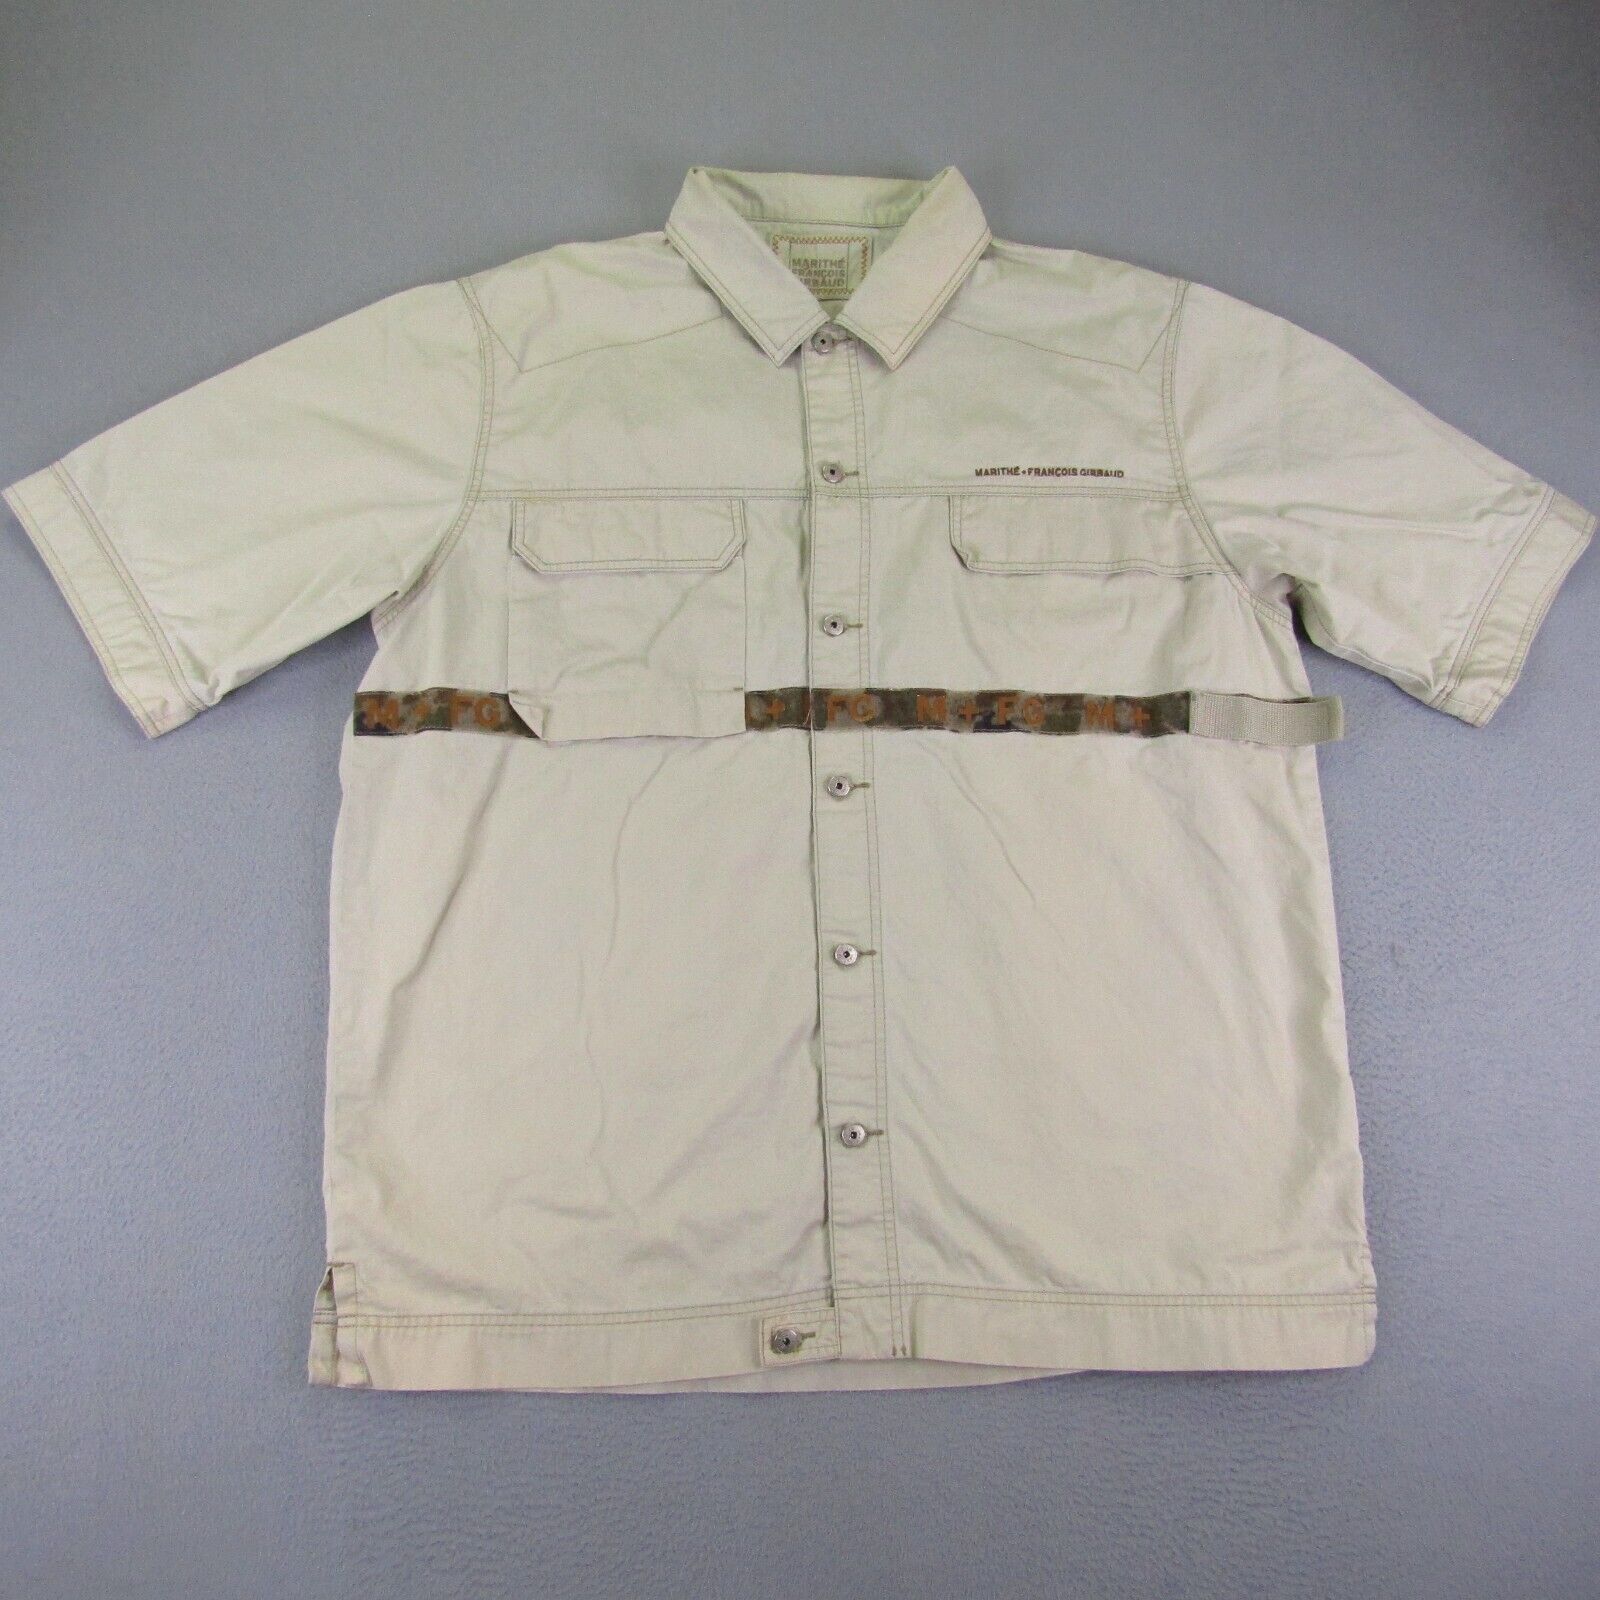 Vintage Marithe Francois Girbaud Shirt Mens XXL Beige Button Up Embroidered Y2K